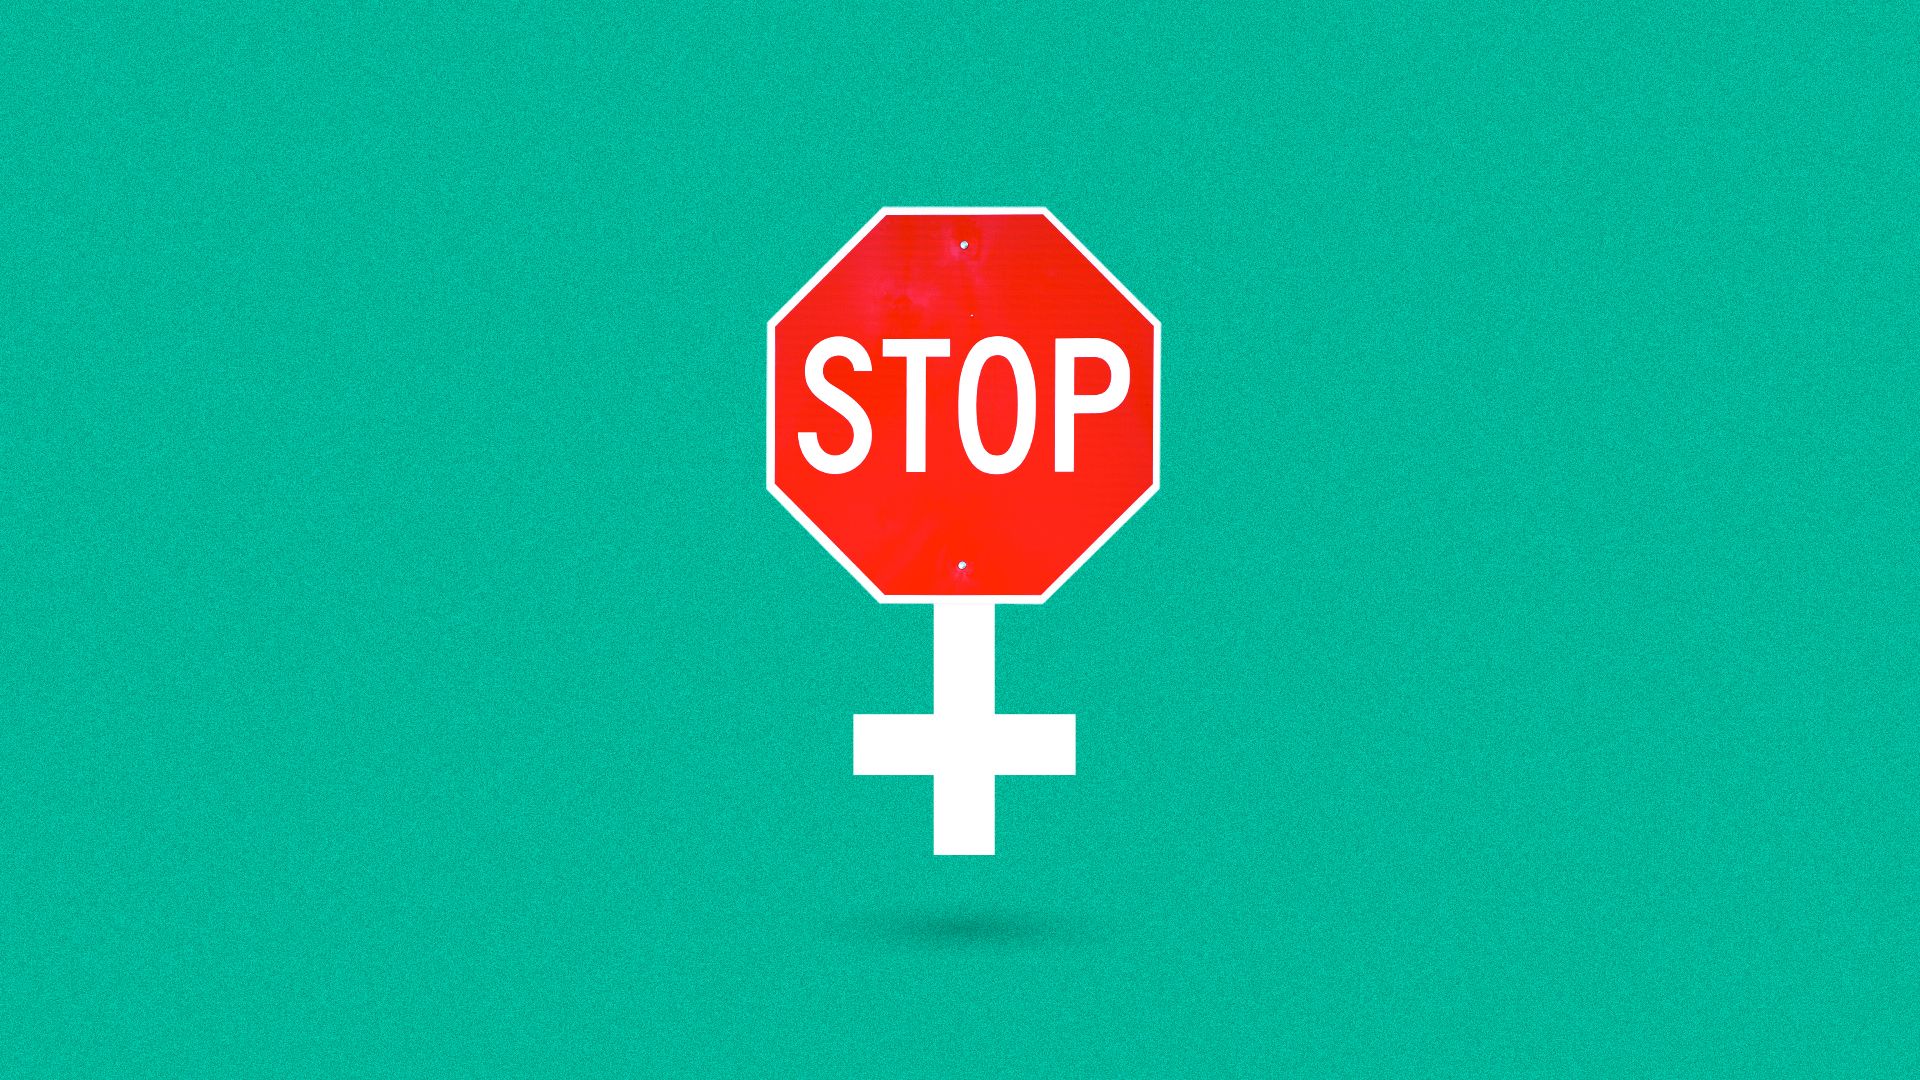 Illustration of a stop sign as the circle part of the female symbol.